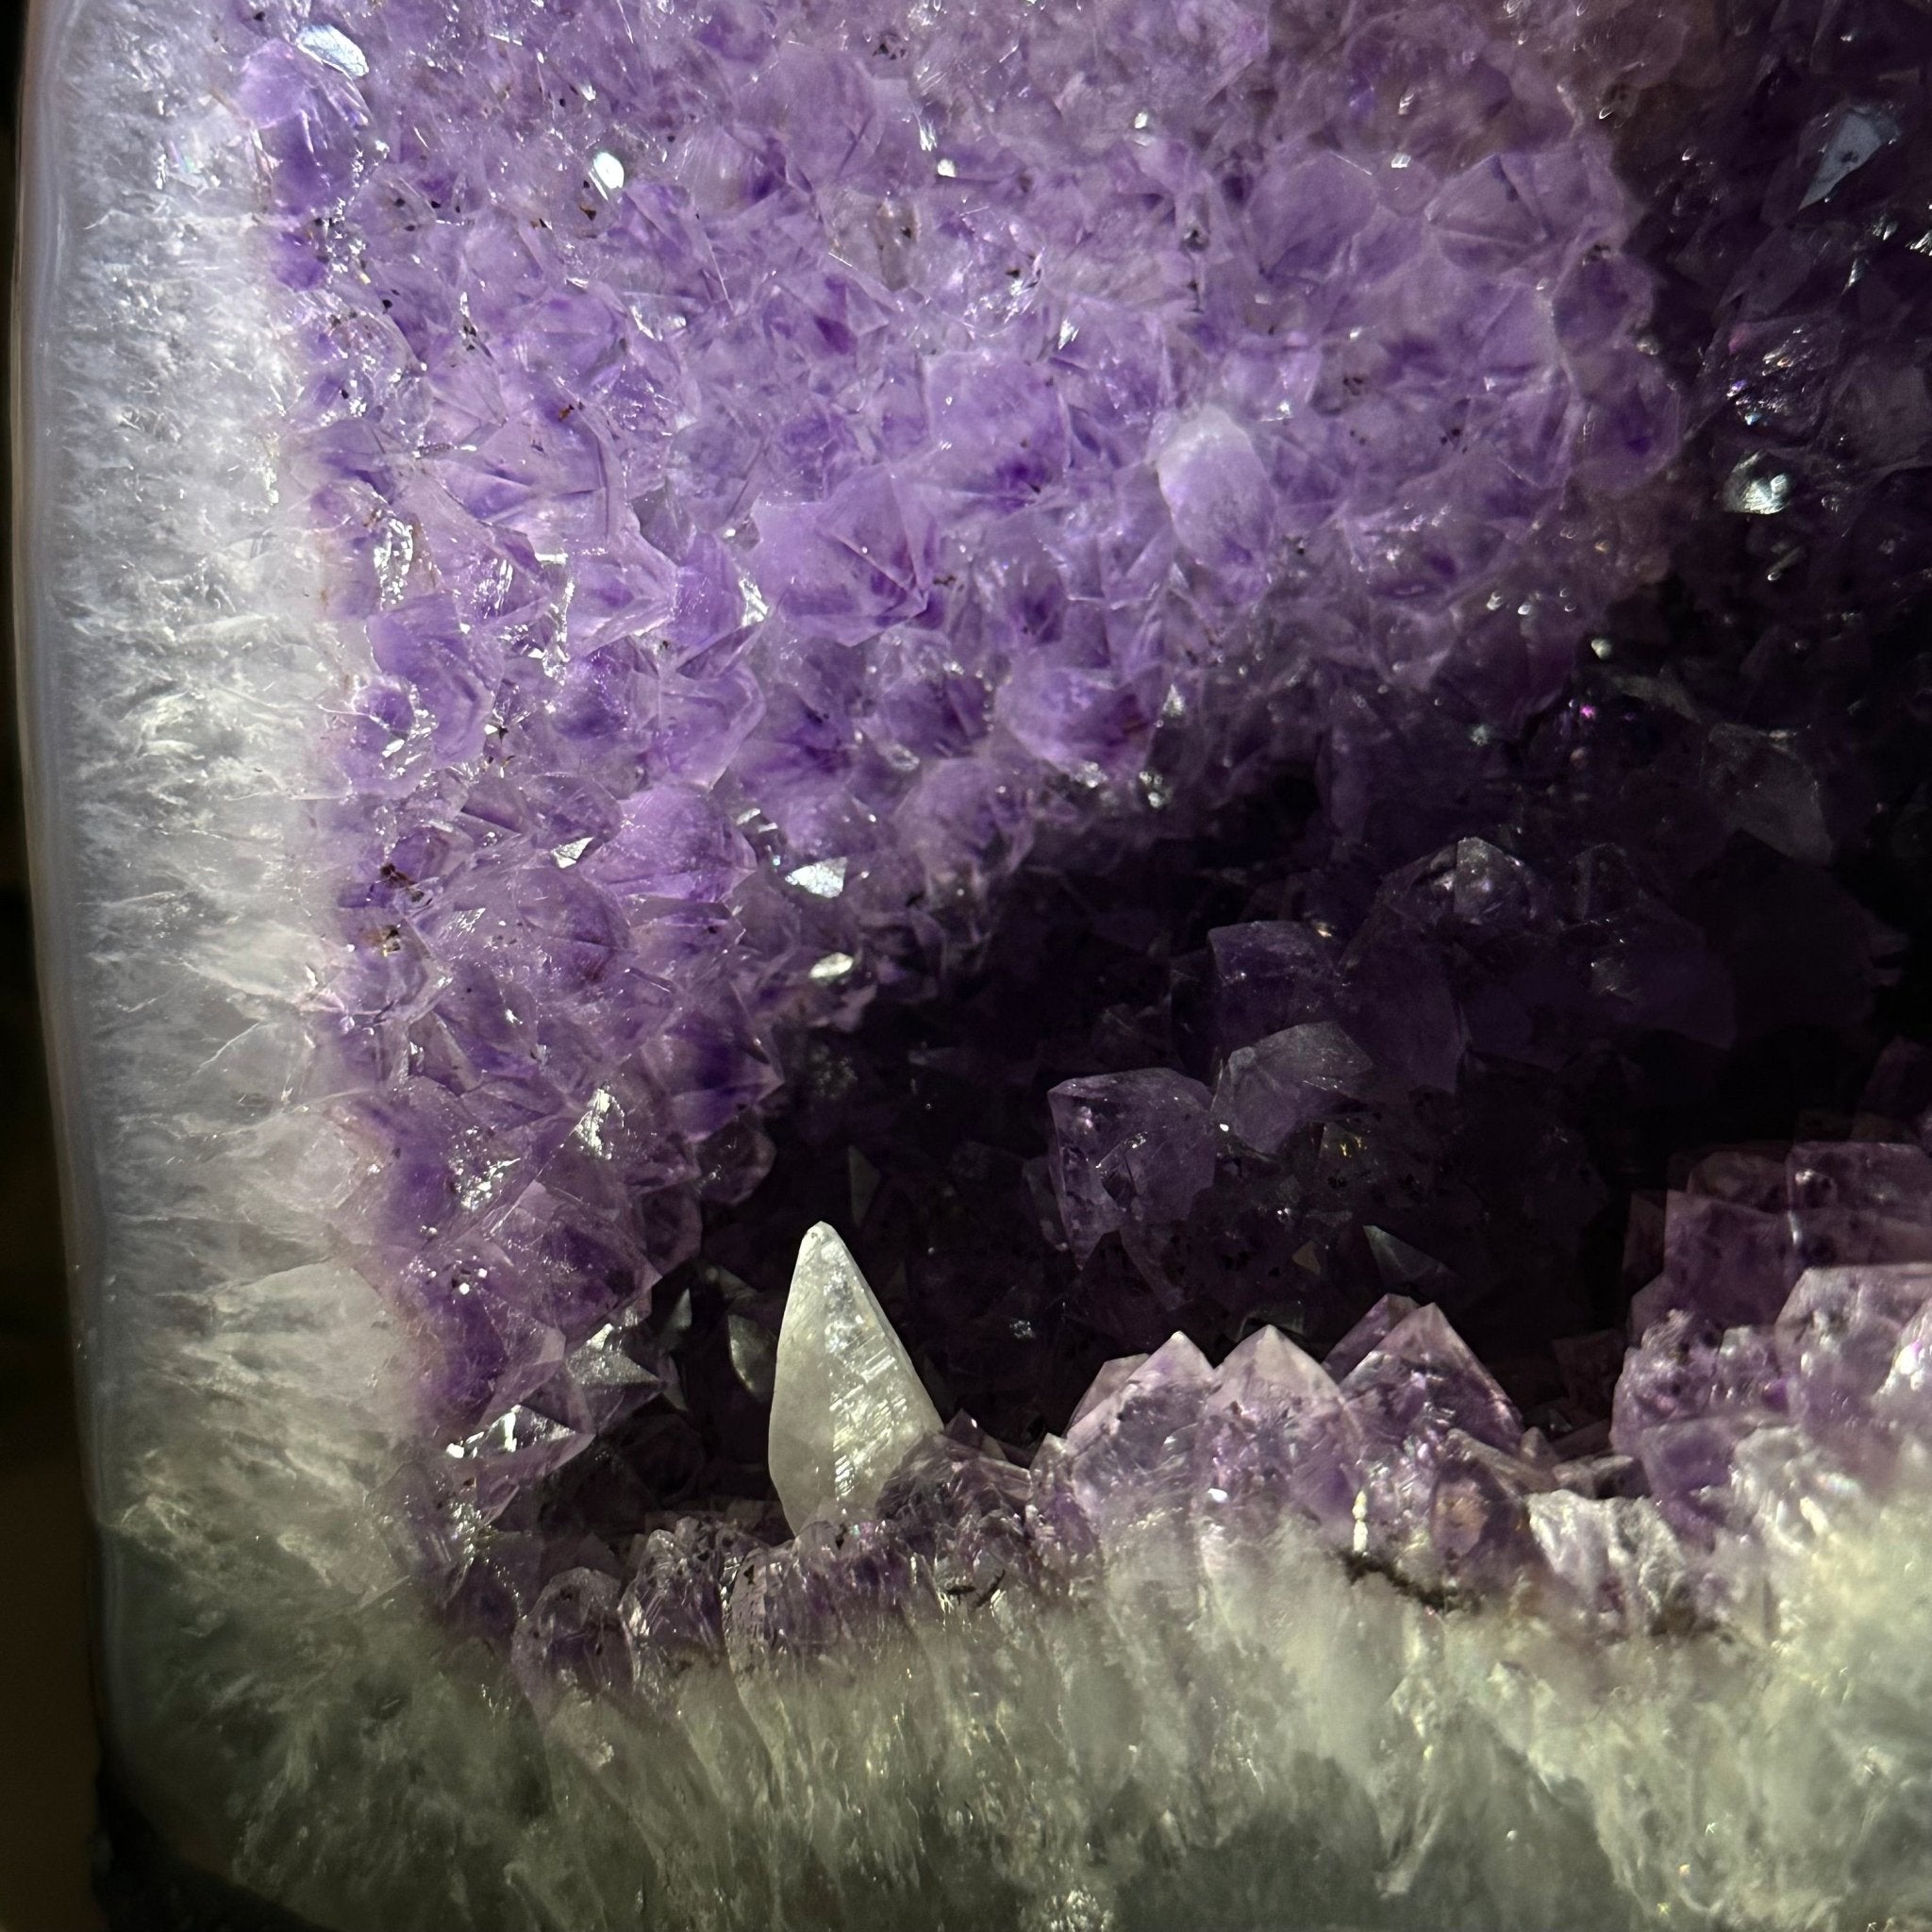 Quality Brazilian Amethyst Cathedral, 13.5 lbs & 10.9" Tall, #5601 - 1363 - Brazil GemsBrazil GemsQuality Brazilian Amethyst Cathedral, 13.5 lbs & 10.9" Tall, #5601 - 1363Cathedrals5601 - 1363